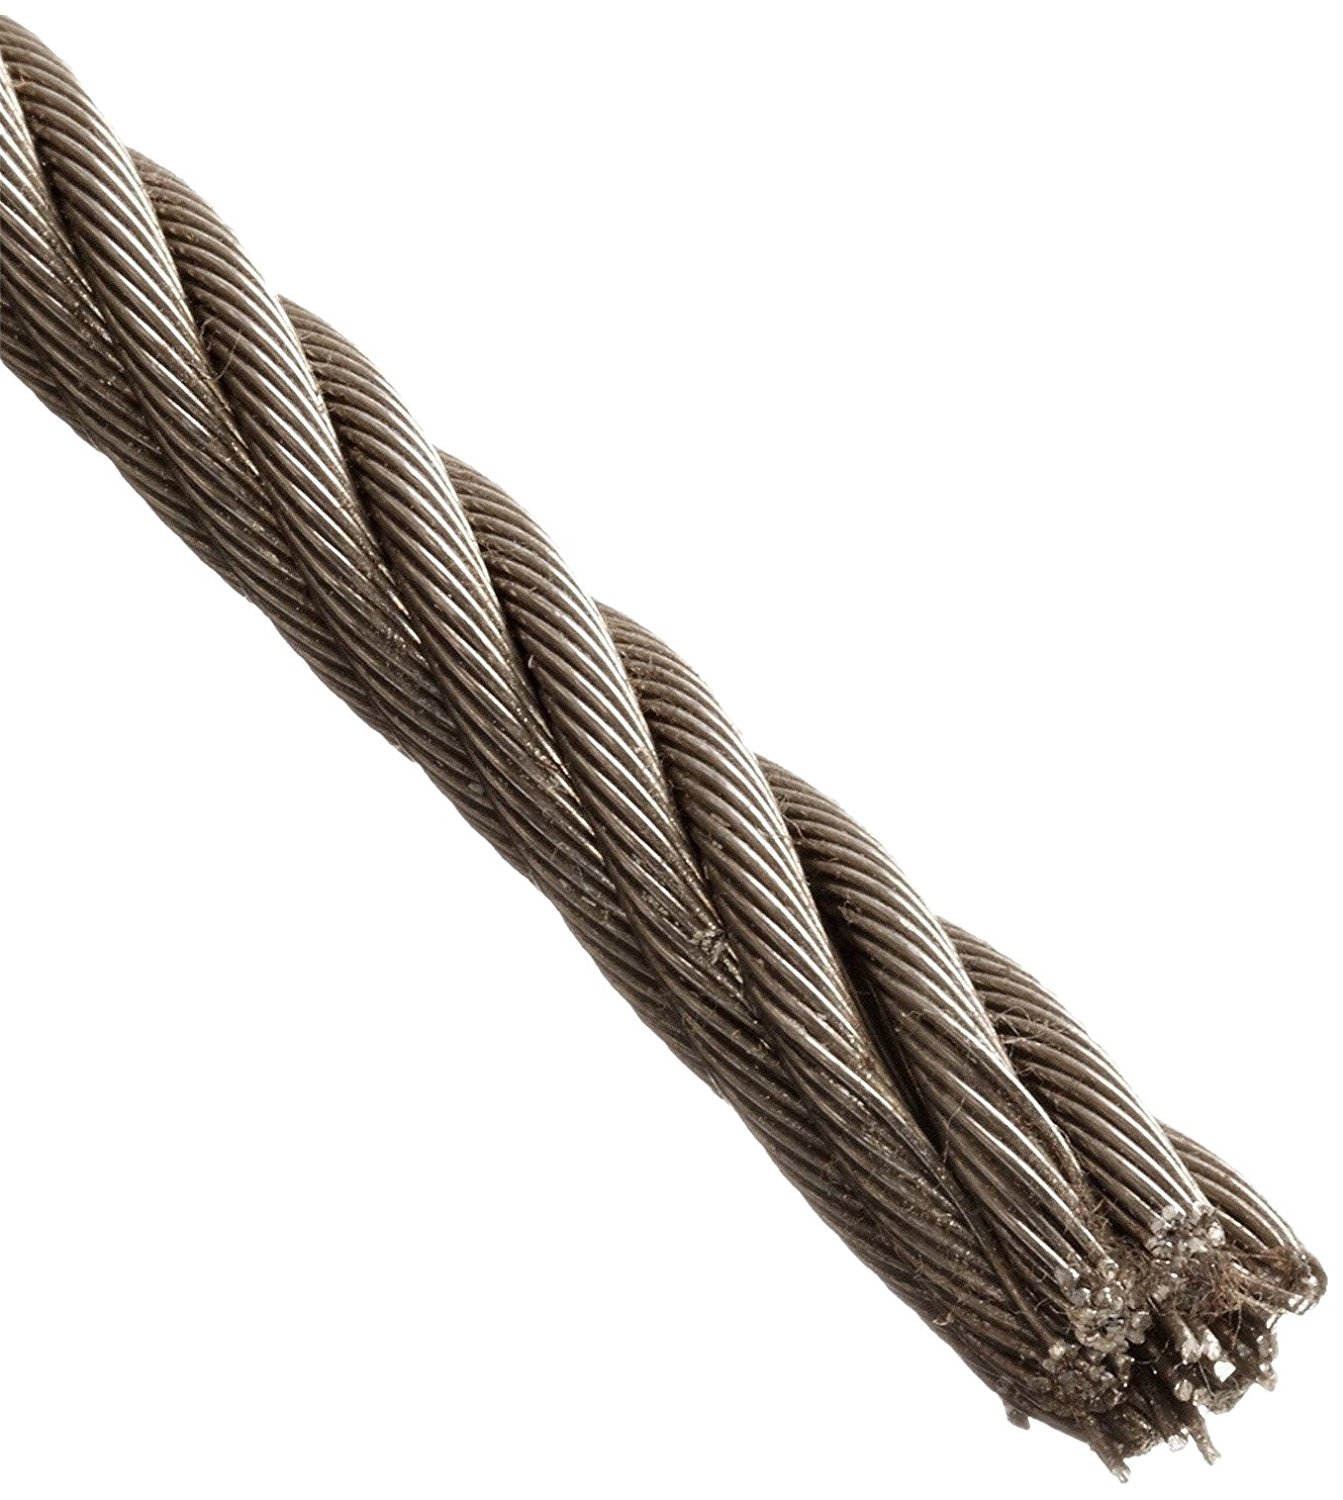 Stainless Steel 316 Wire Rope on Reel, 7x19 Strand Core: Cable And ...